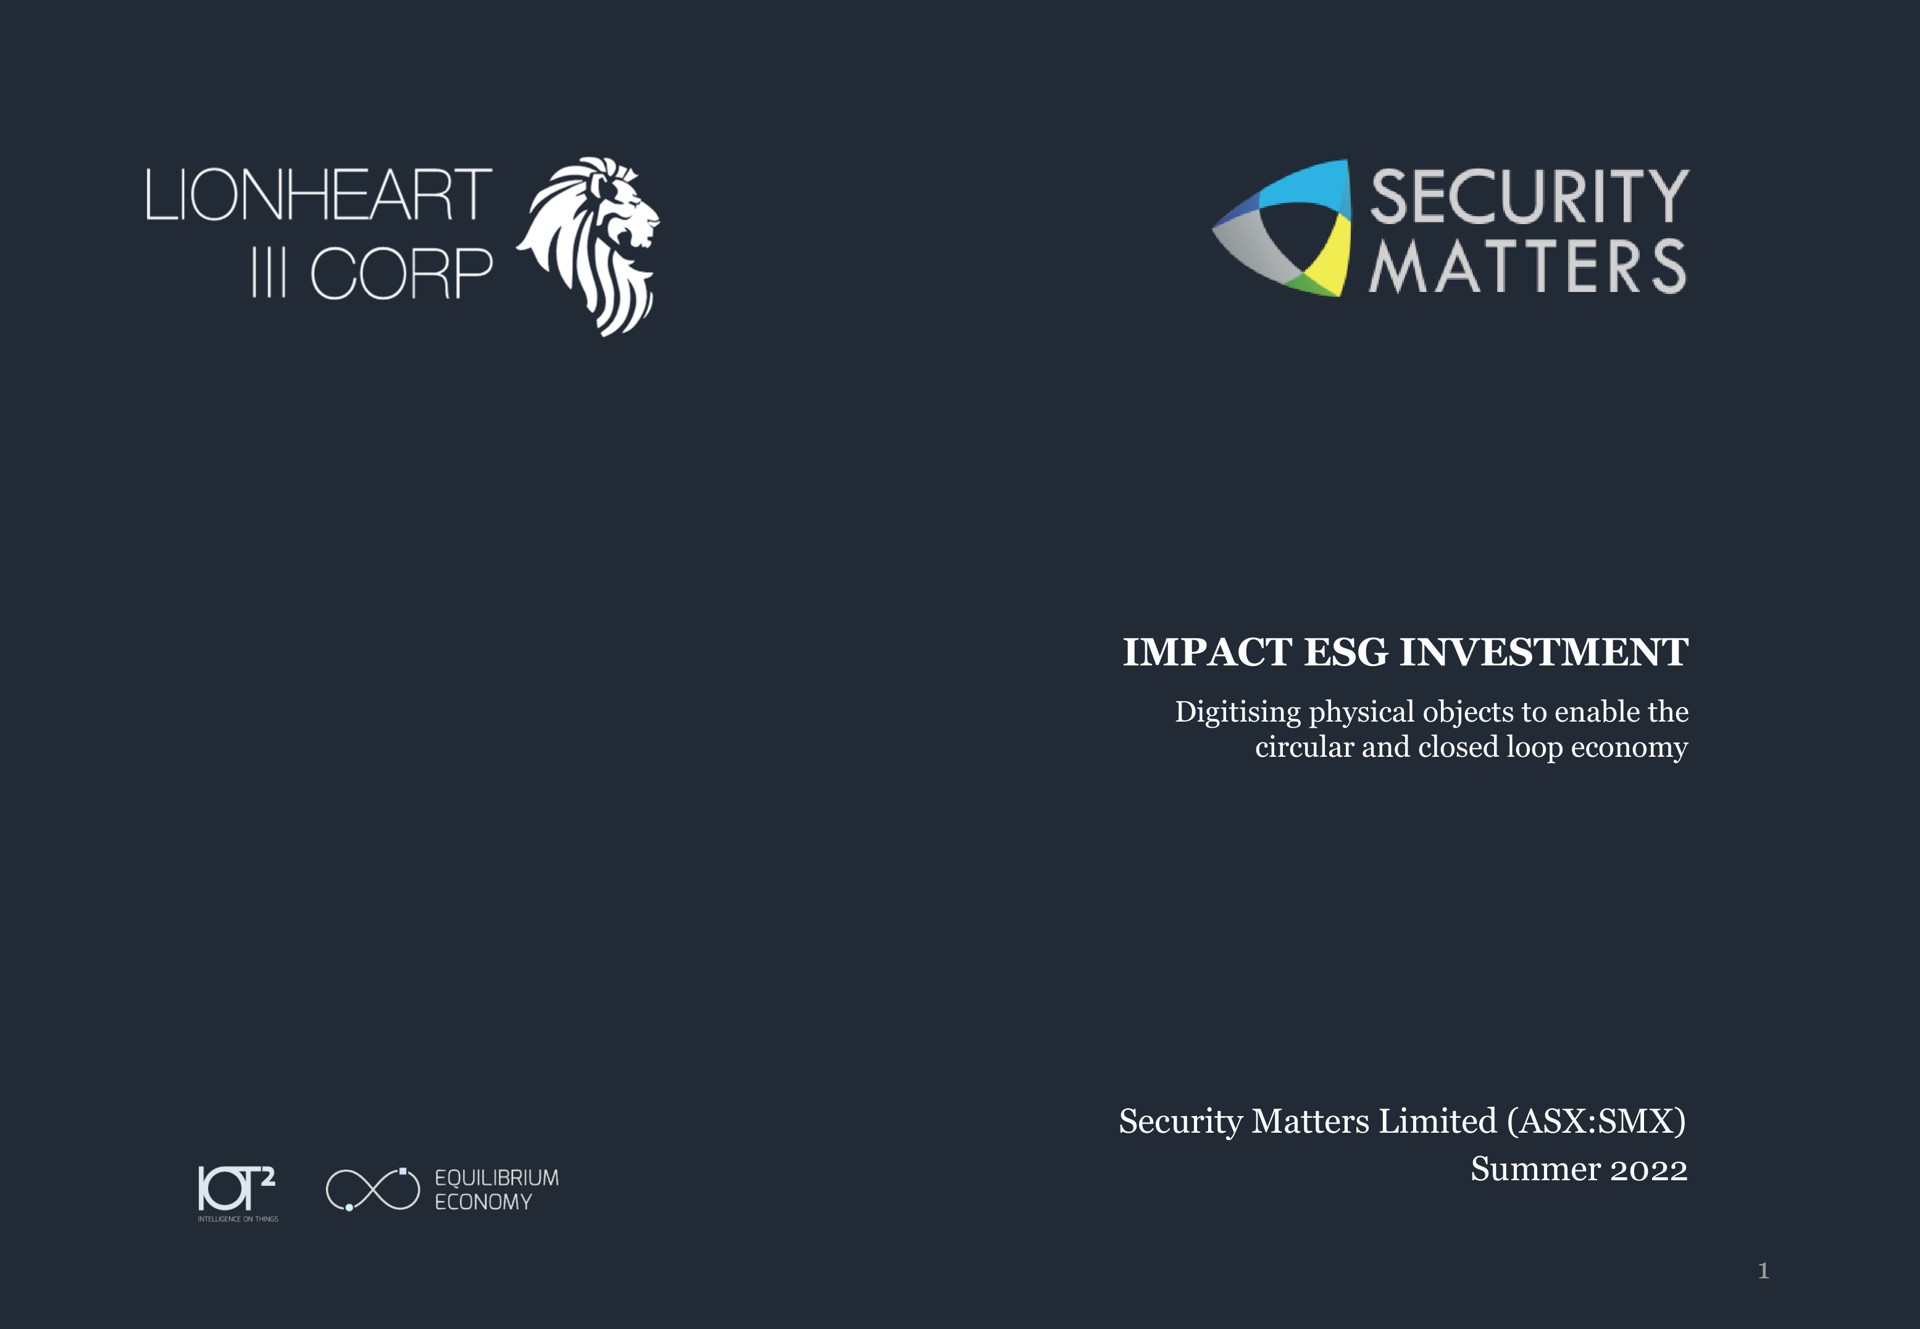 lionheart corp security matters | Security Matters